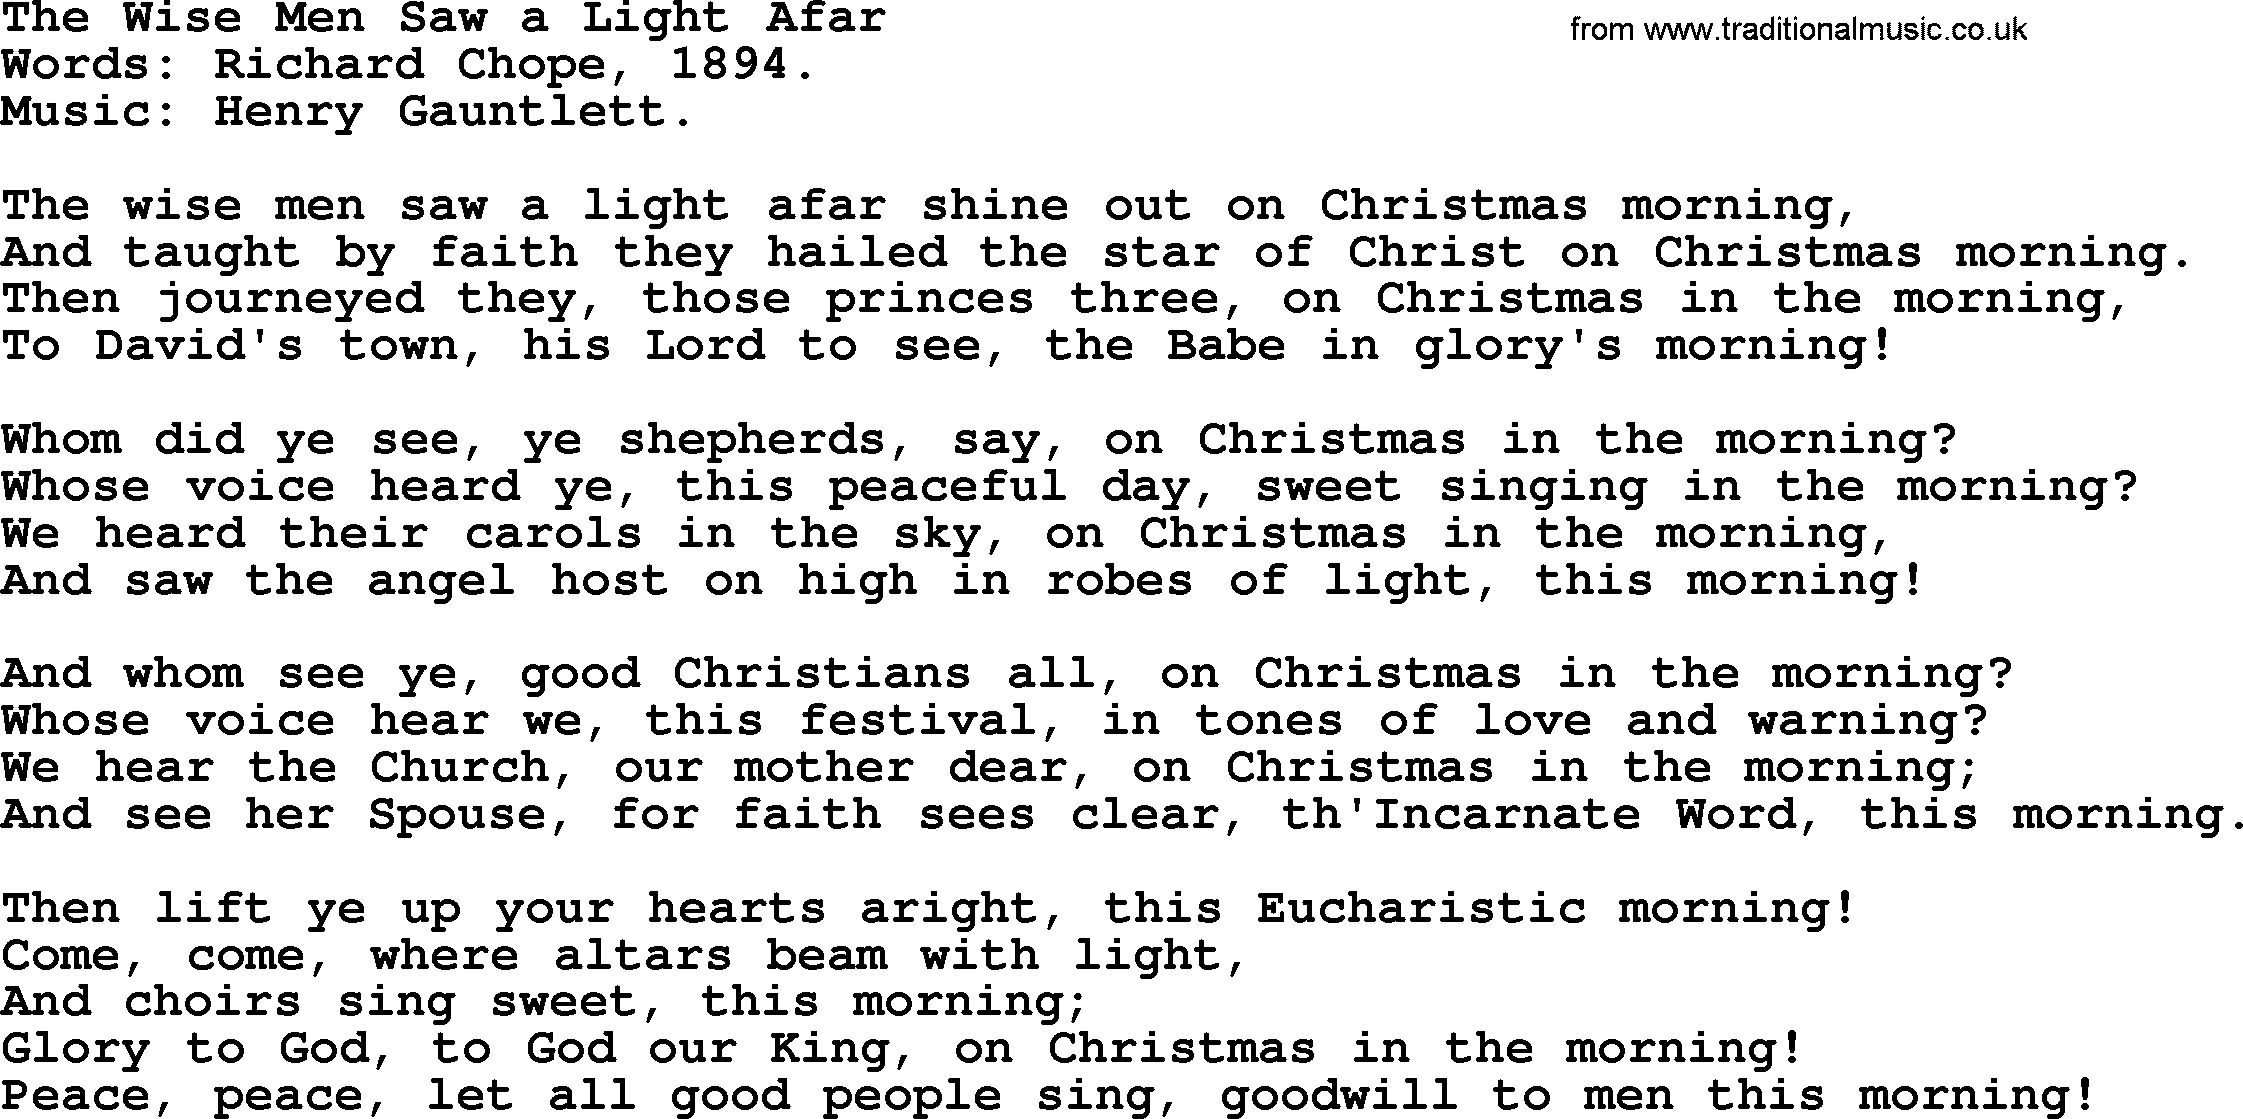 Christmas Hymns, Carols and Songs, title: The Wise Men Saw A Light Afar, lyrics with PDF